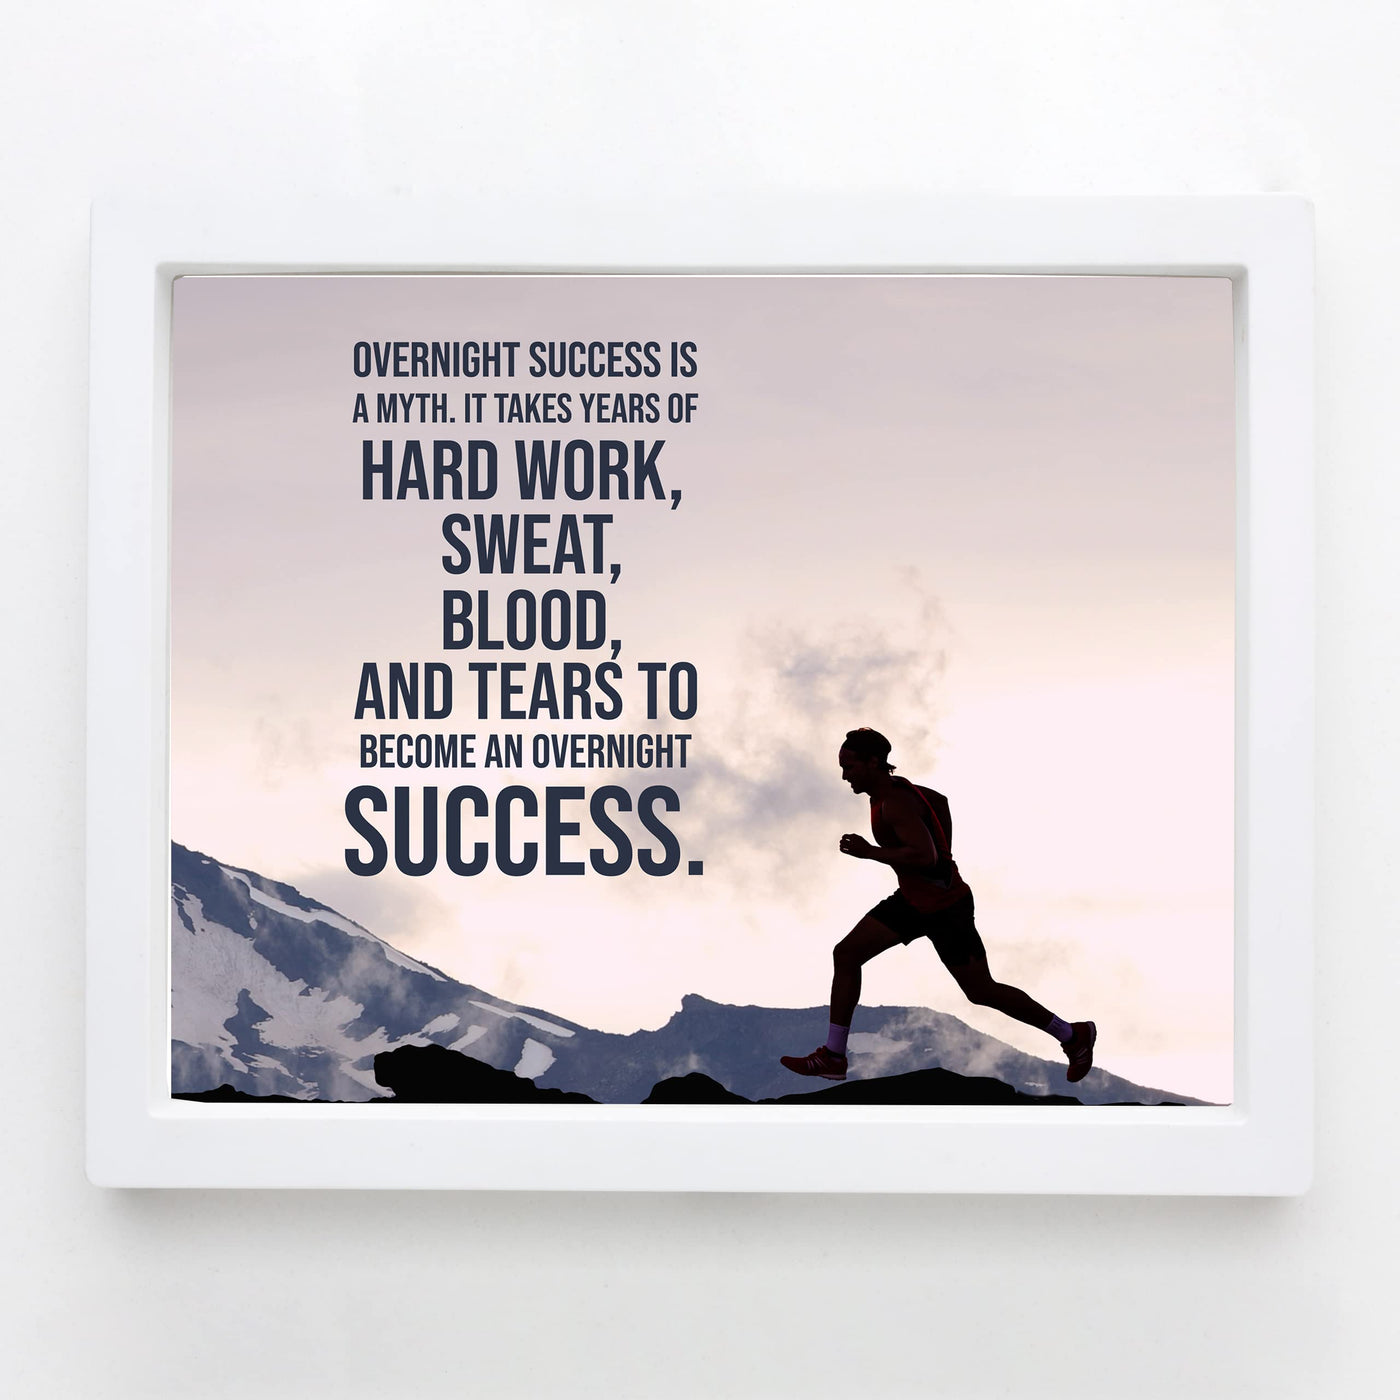 Overnight Success Is a Myth Motivational Exercise & Fitness Print Wall Art -10 x 8" Inspirational Sports Print -Ready to Frame. Perfect Home-School-Office-Gym-Locker Room Decor. Great Gift!